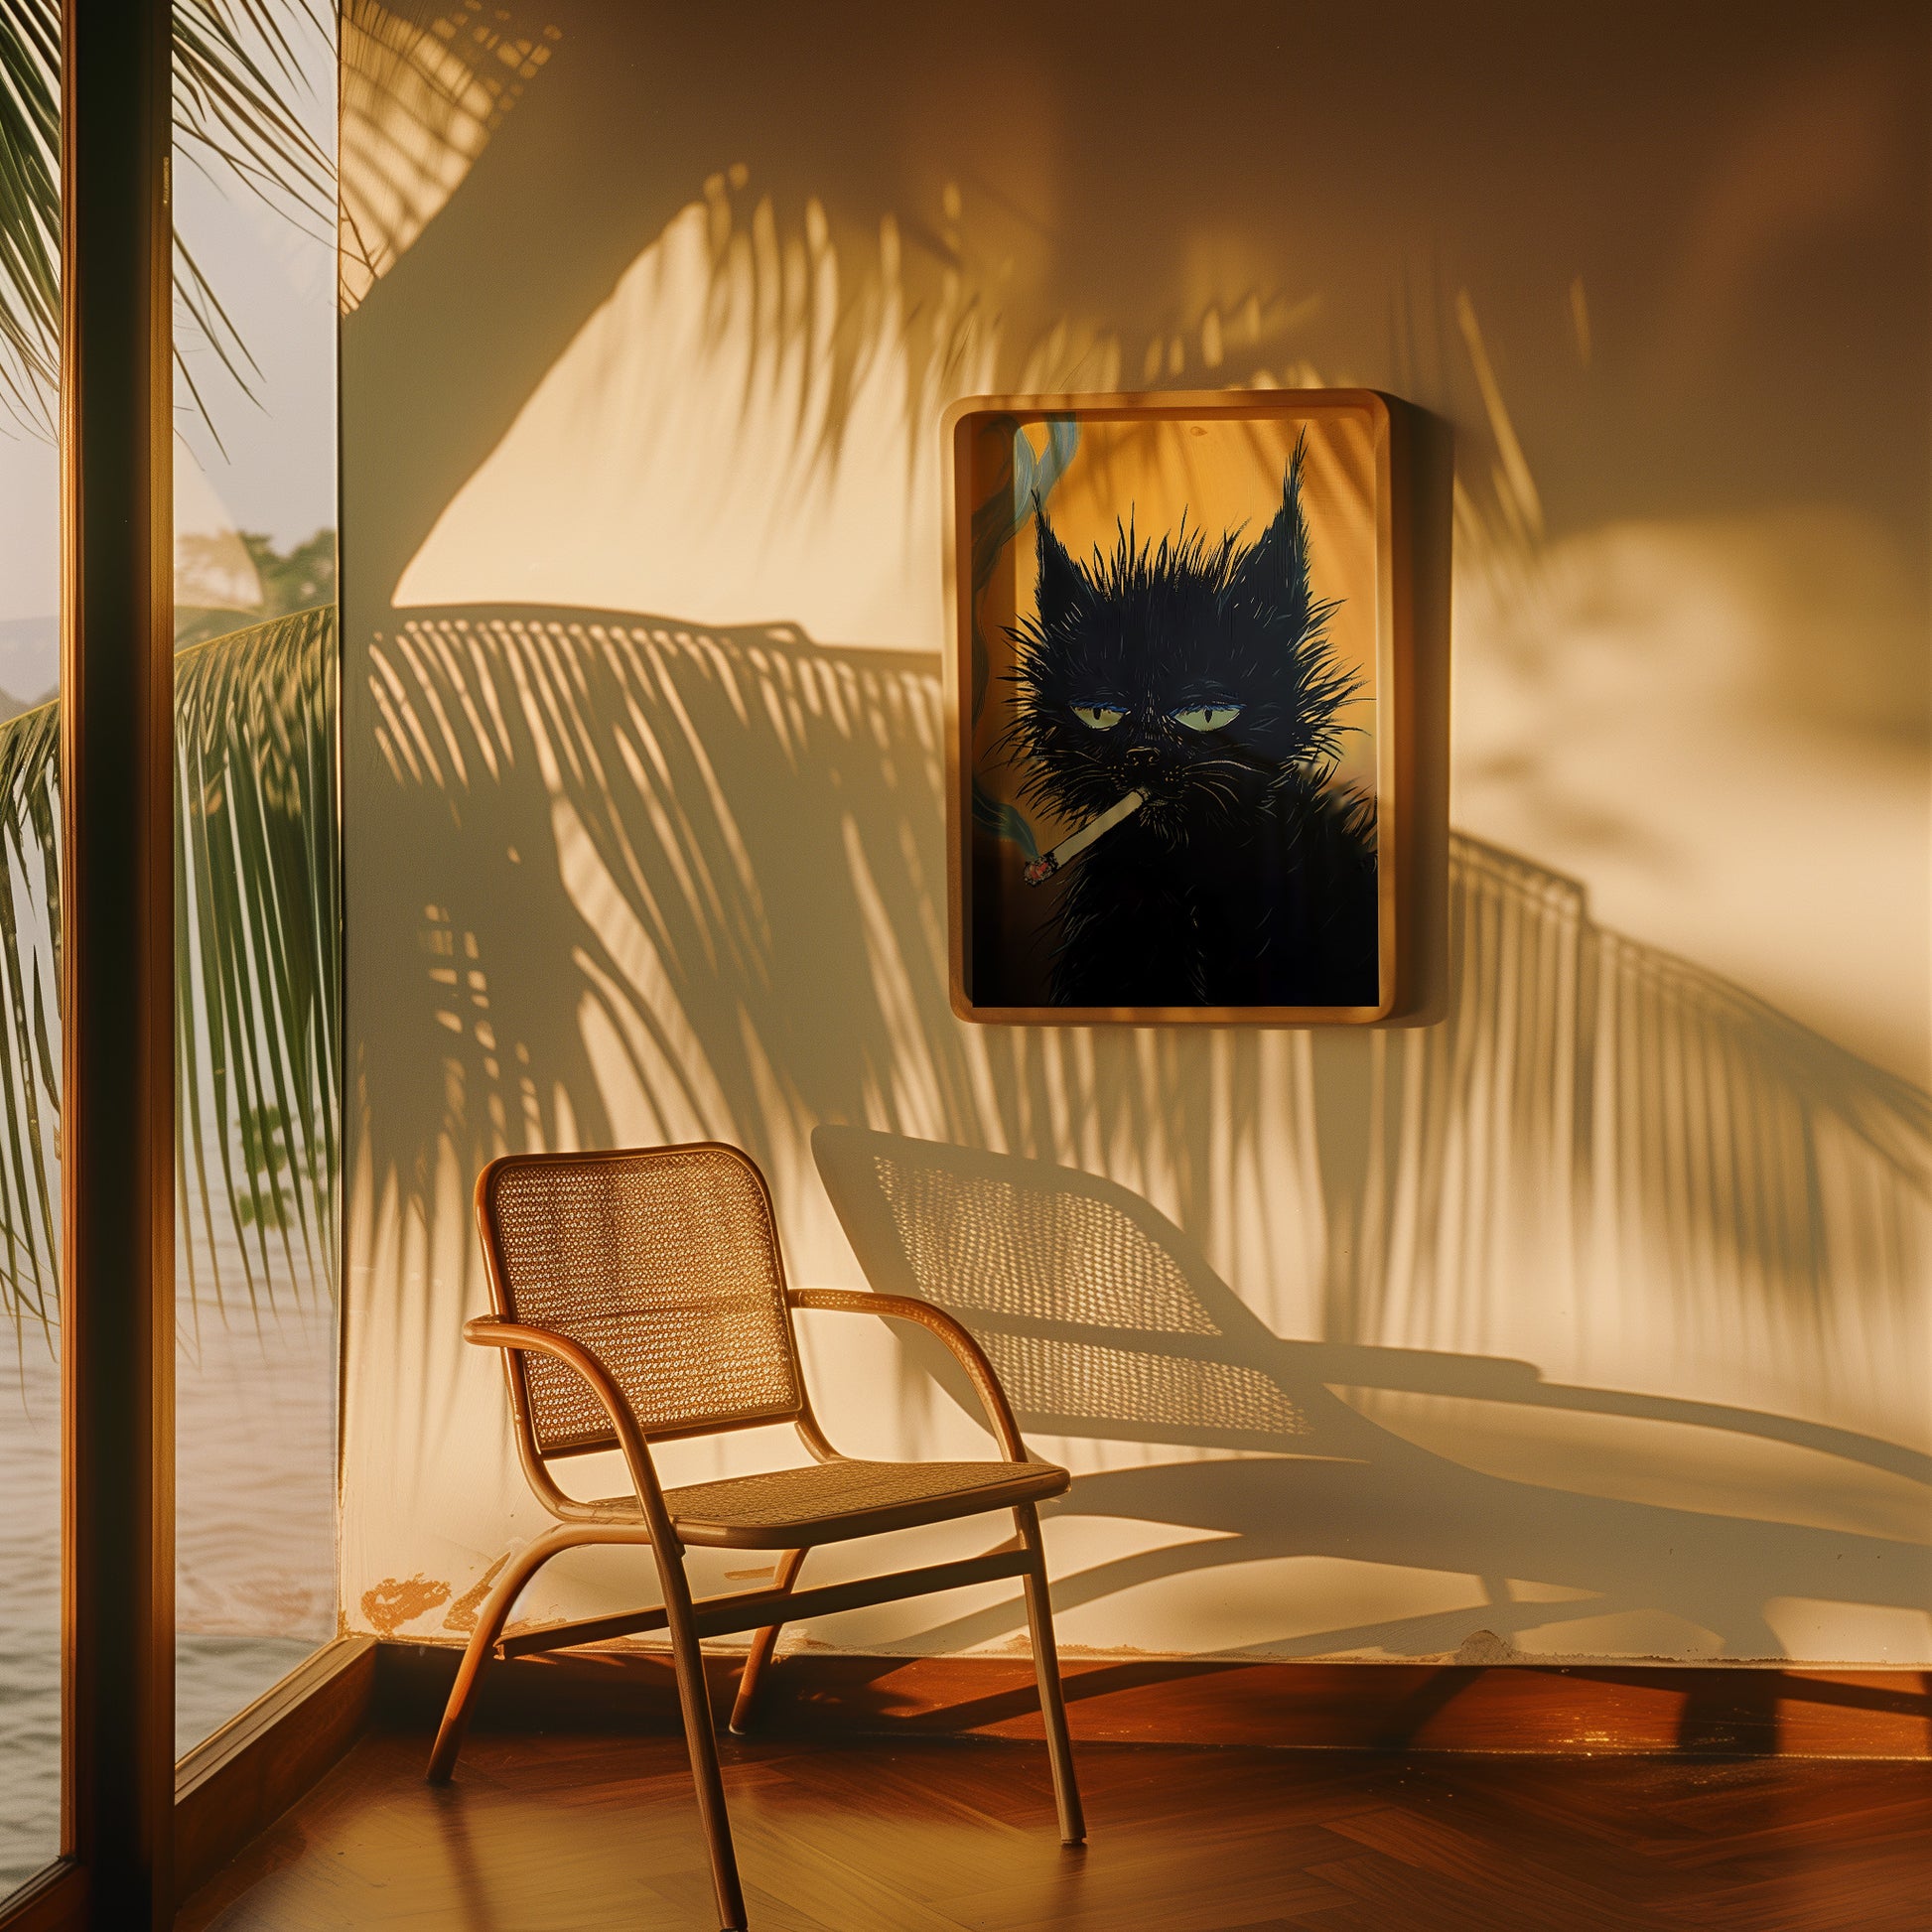 A cozy corner with a wicker chair and framed art of a black cat, with sunlight casting palm tree shadows.